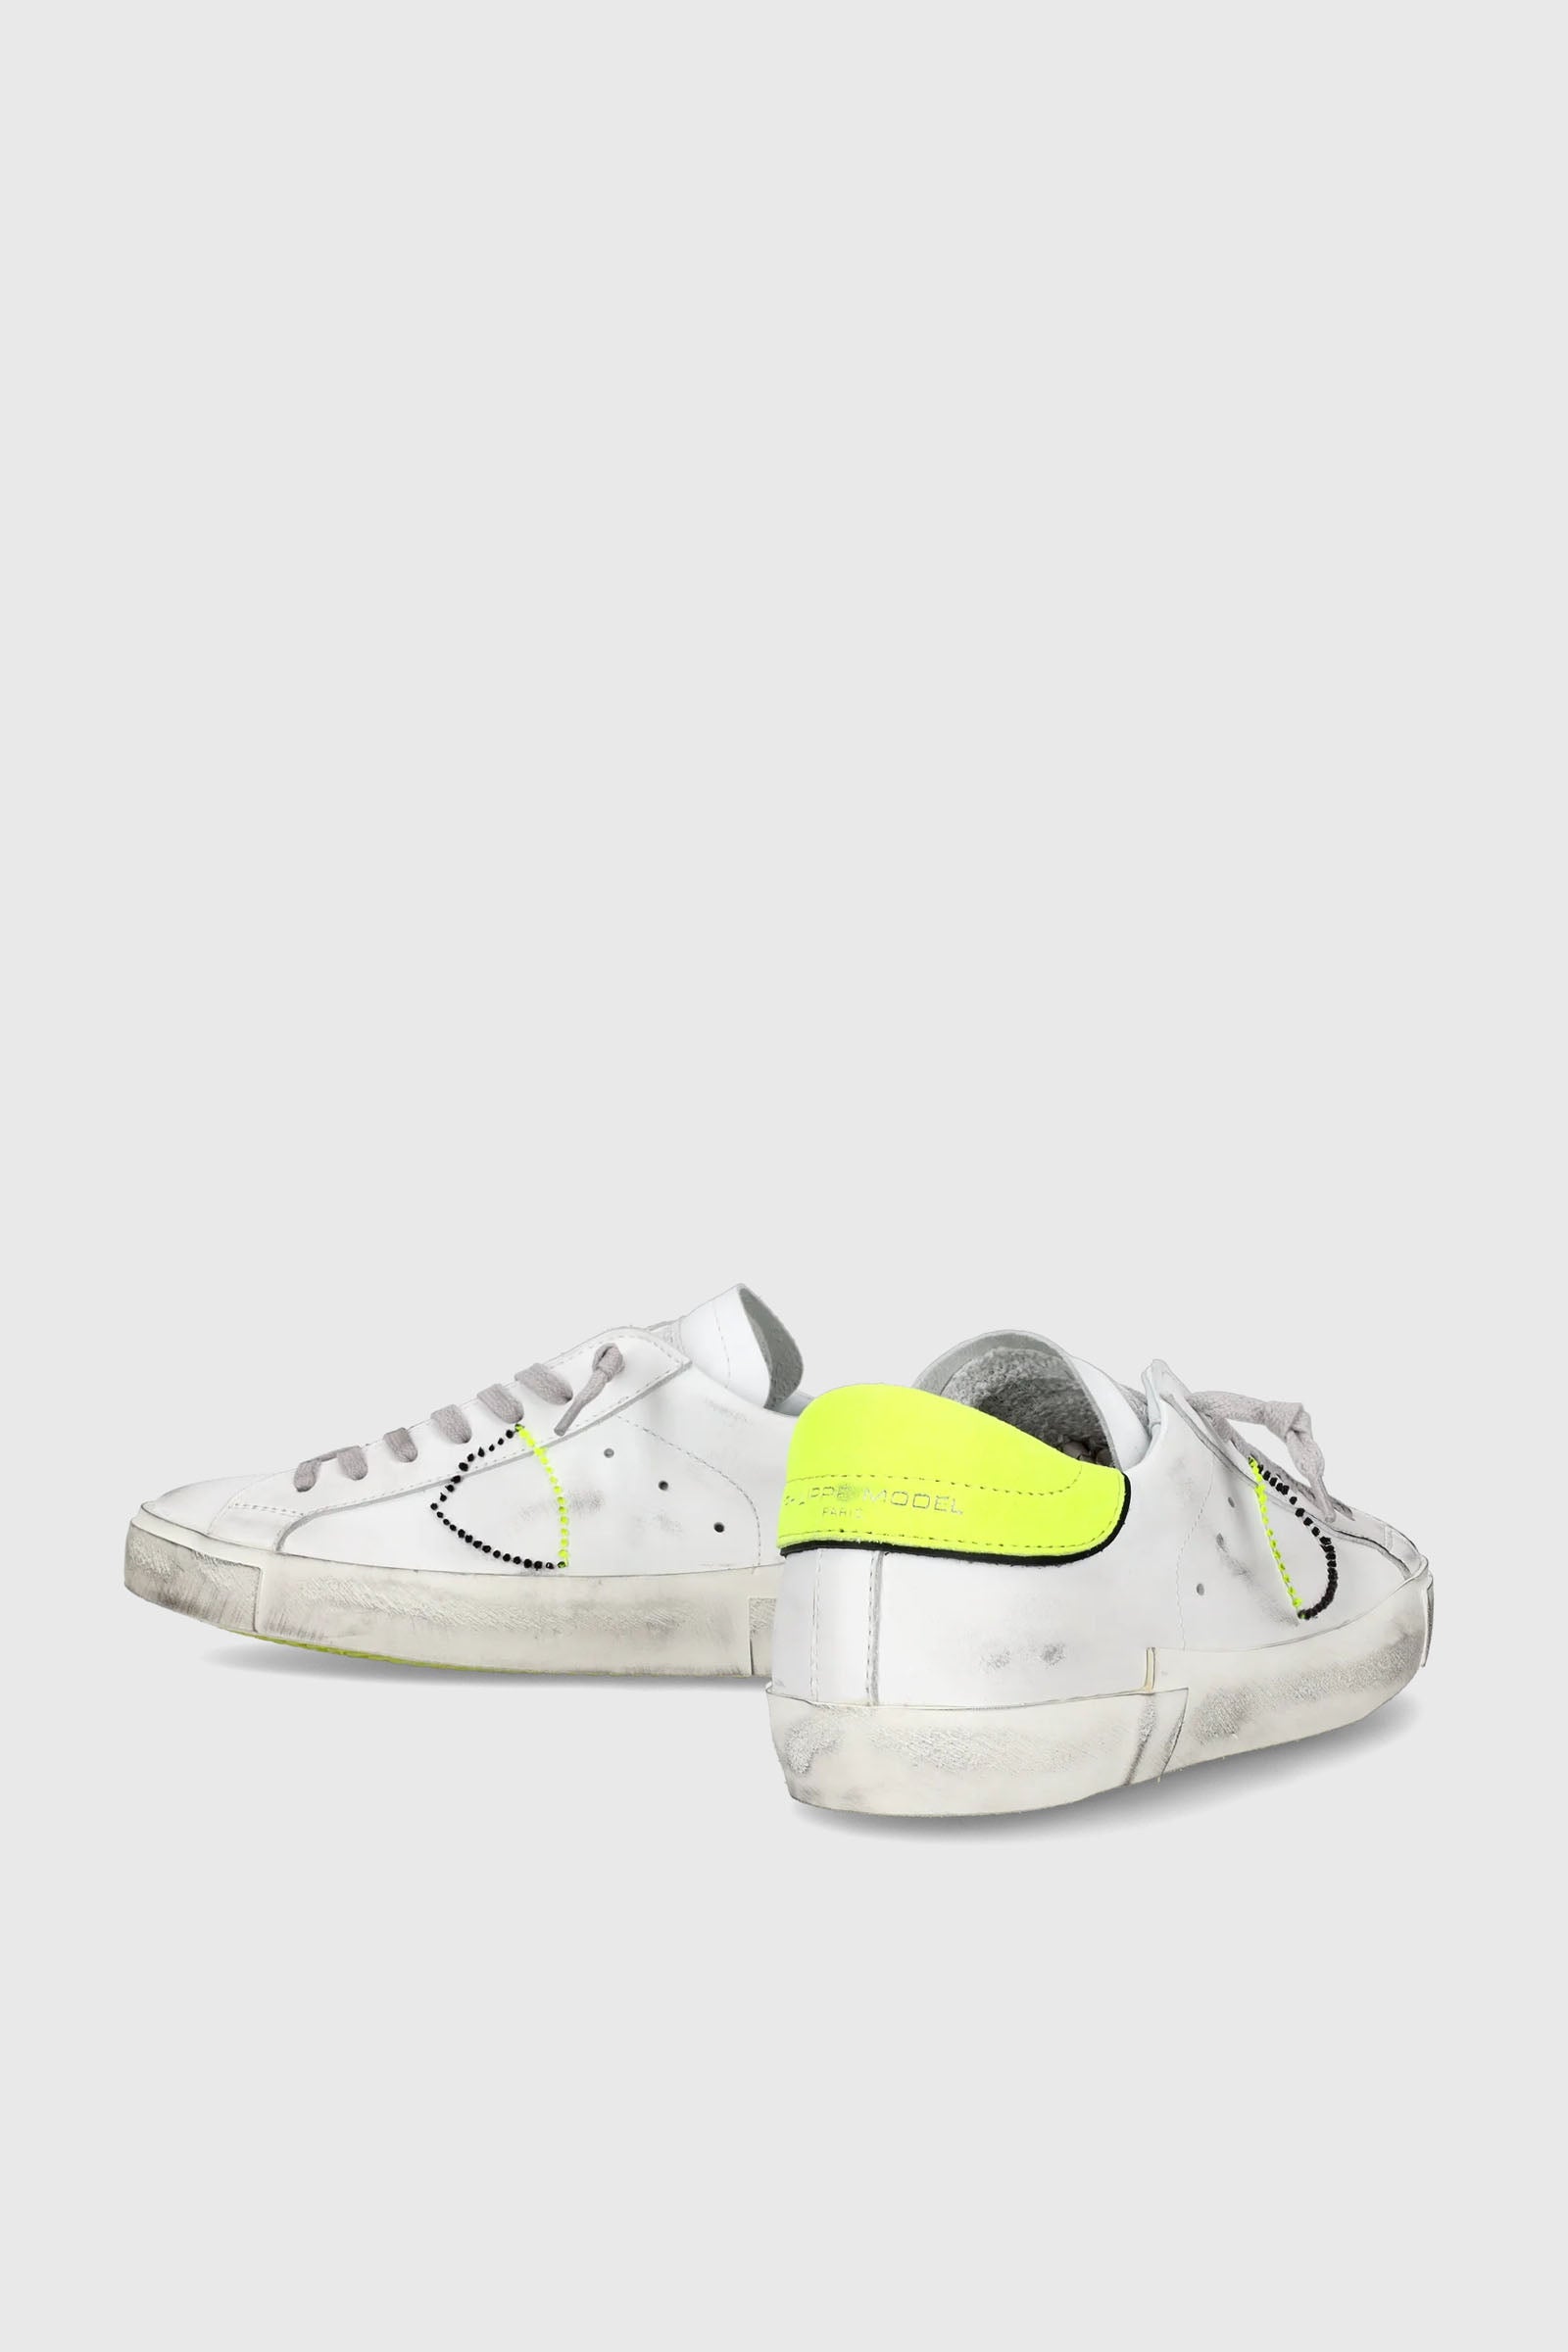 Philippe Model Sneakers PRSX Veau Broderie Pelle Bianco/Giallo Fluo - 4